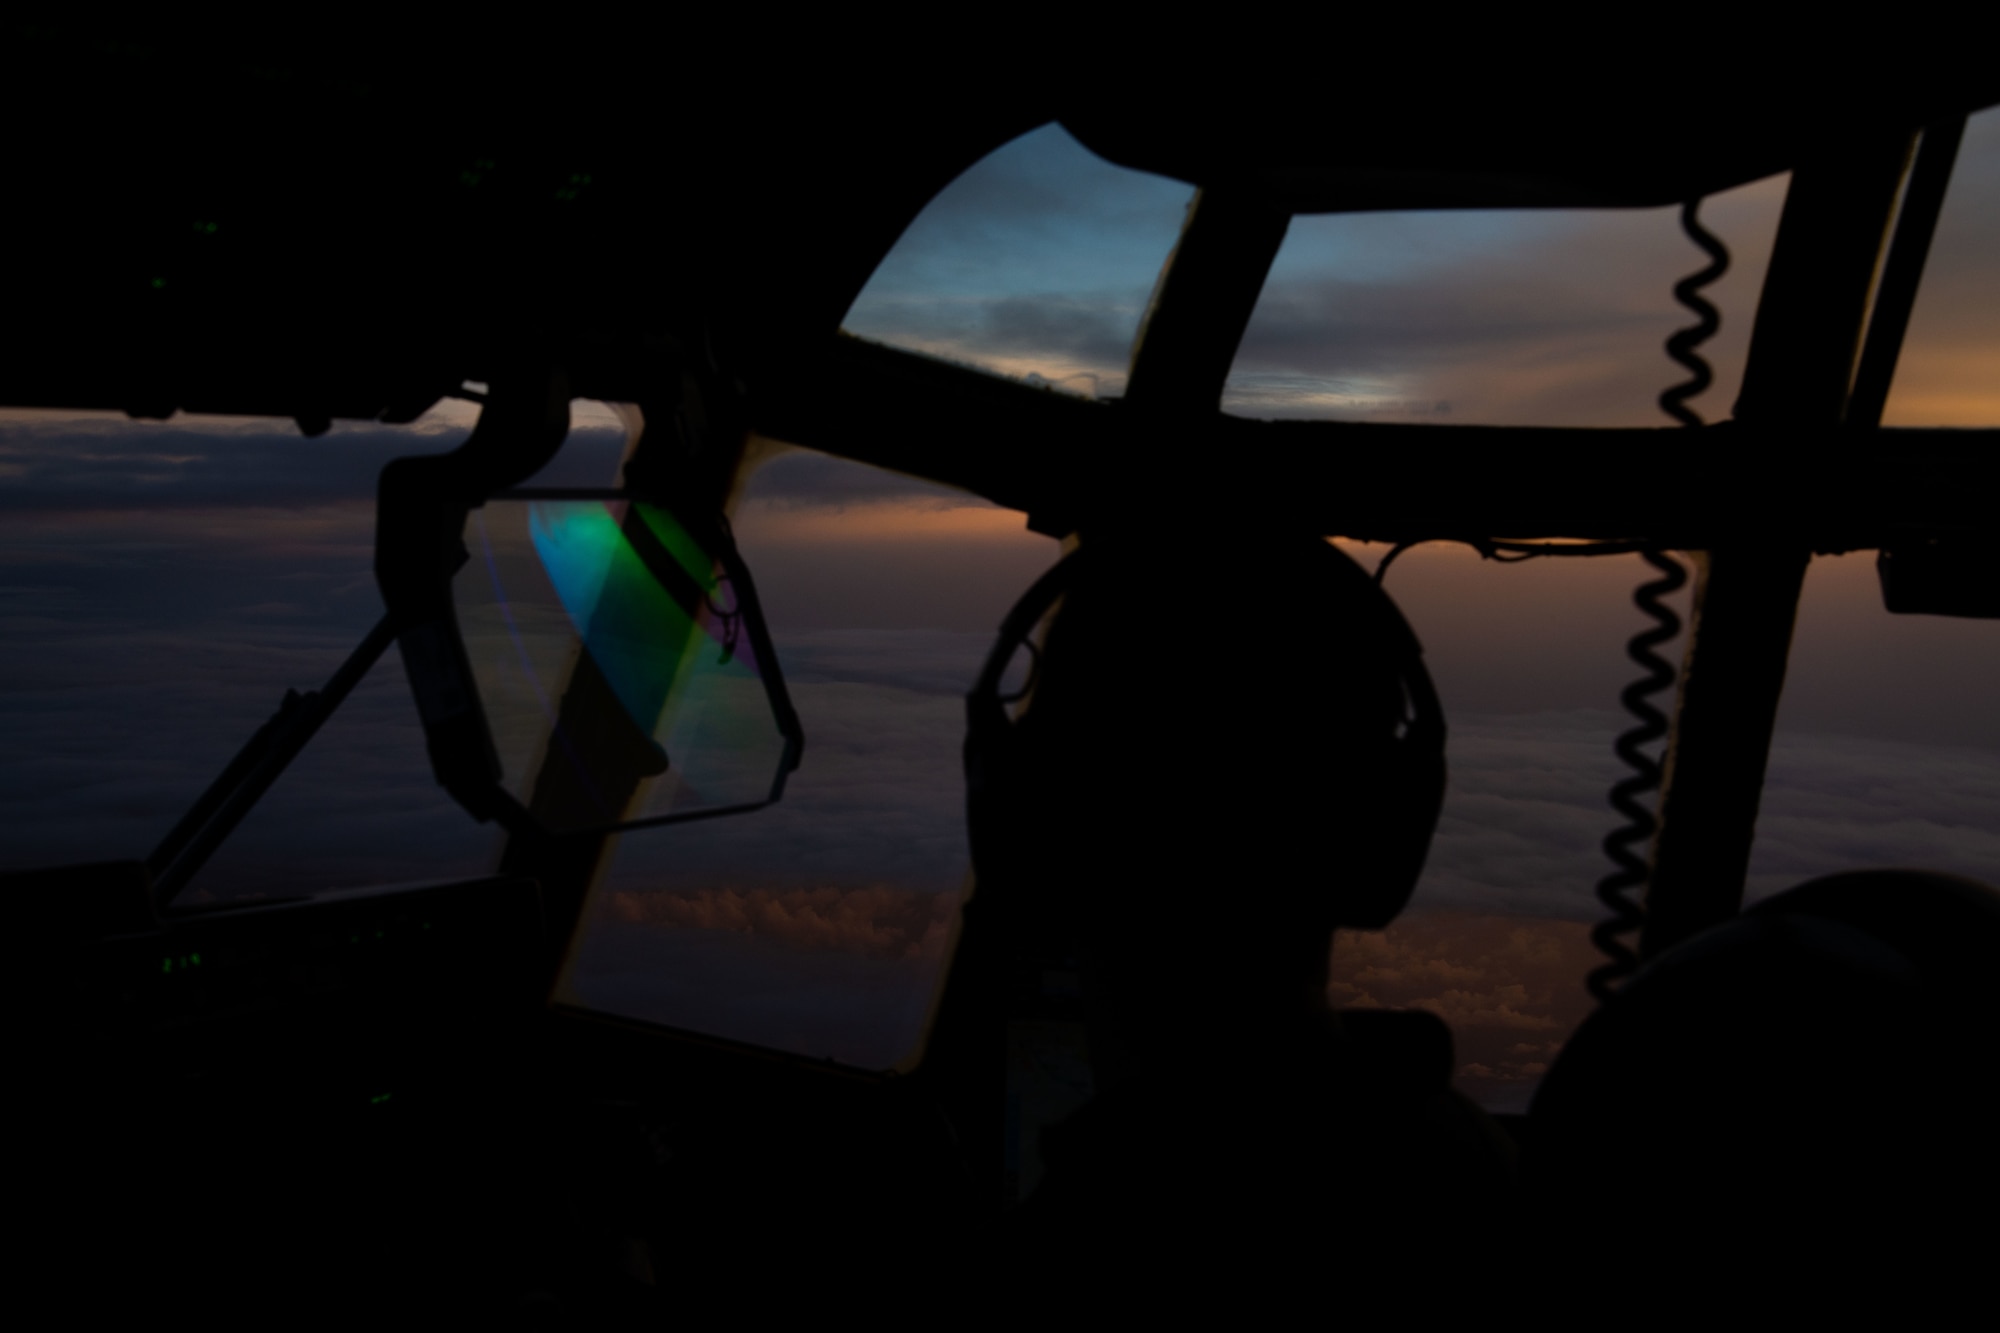 1st Lt. Tim Viere, pilot for the 53rd Weather Reconnaissance Squadron at Keesler Air Force Base, Miss., steers a WC-130J toward Hurricane Ida off the coast of Cuba Aug. 27, 2021. The flight left from Keesler and recovered in San Antonio in order to avoid forecasted impacts from the storm as well as continue to support the data collection mission of the 53rd. (U.S. Air Force photo by Staff Sgt. Kristen Pittman)